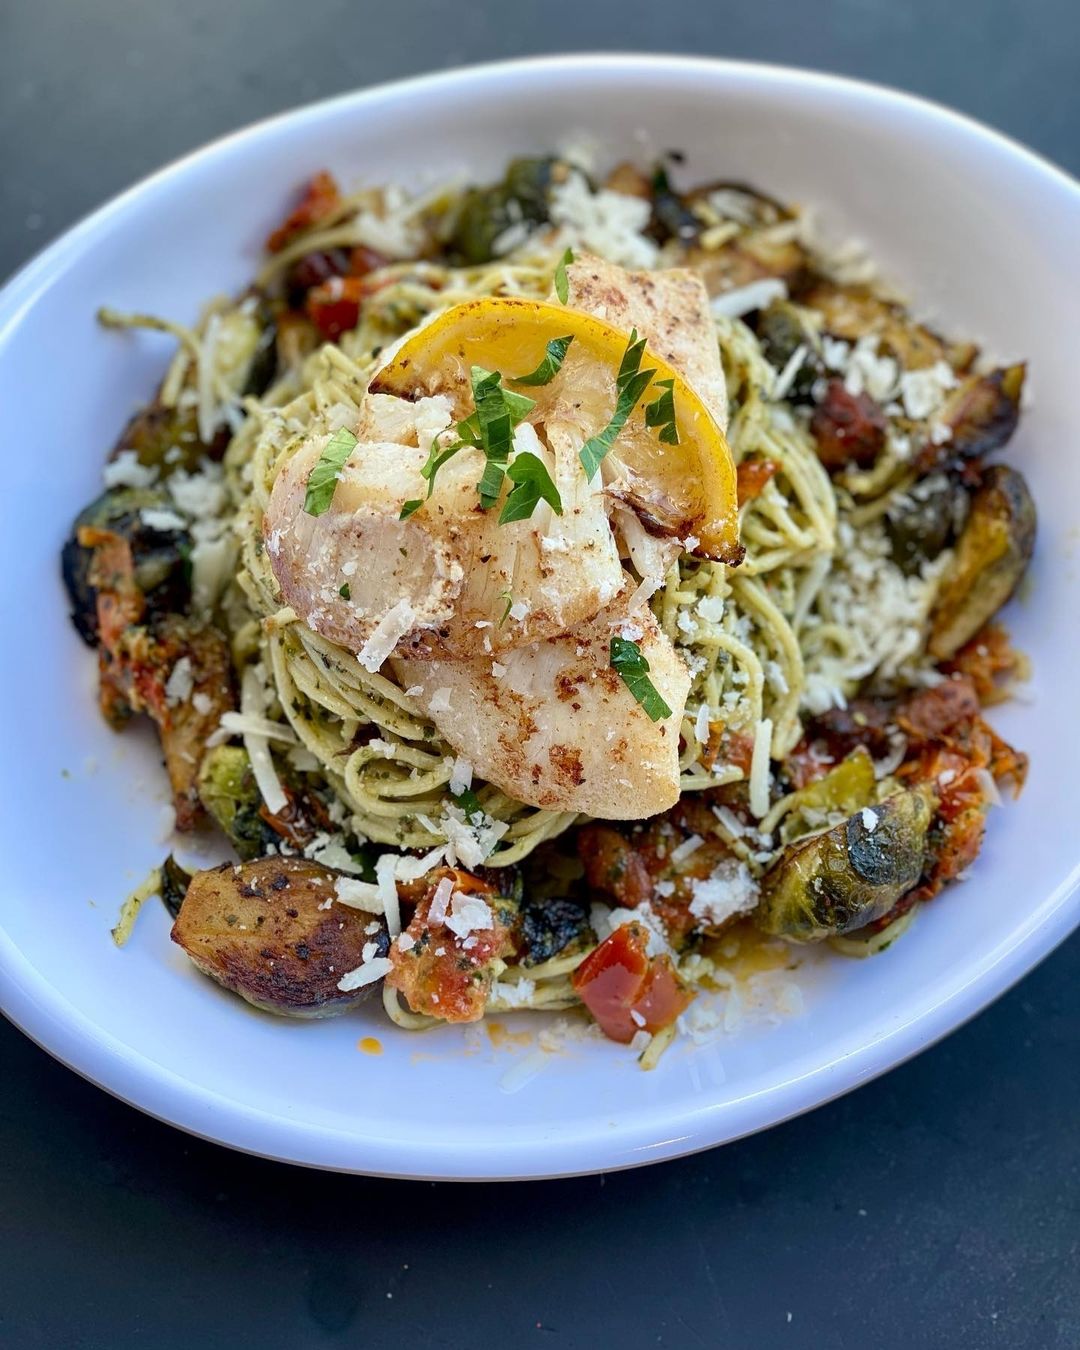 Grab a table at a cozy farm-to-table restaurant and enjoy a hearty meal prepared from locally sourced meats, free range chicken, locally grown vegetables, fruits and other ingredients harvested right here in the fields of Centre County.
This dish from B